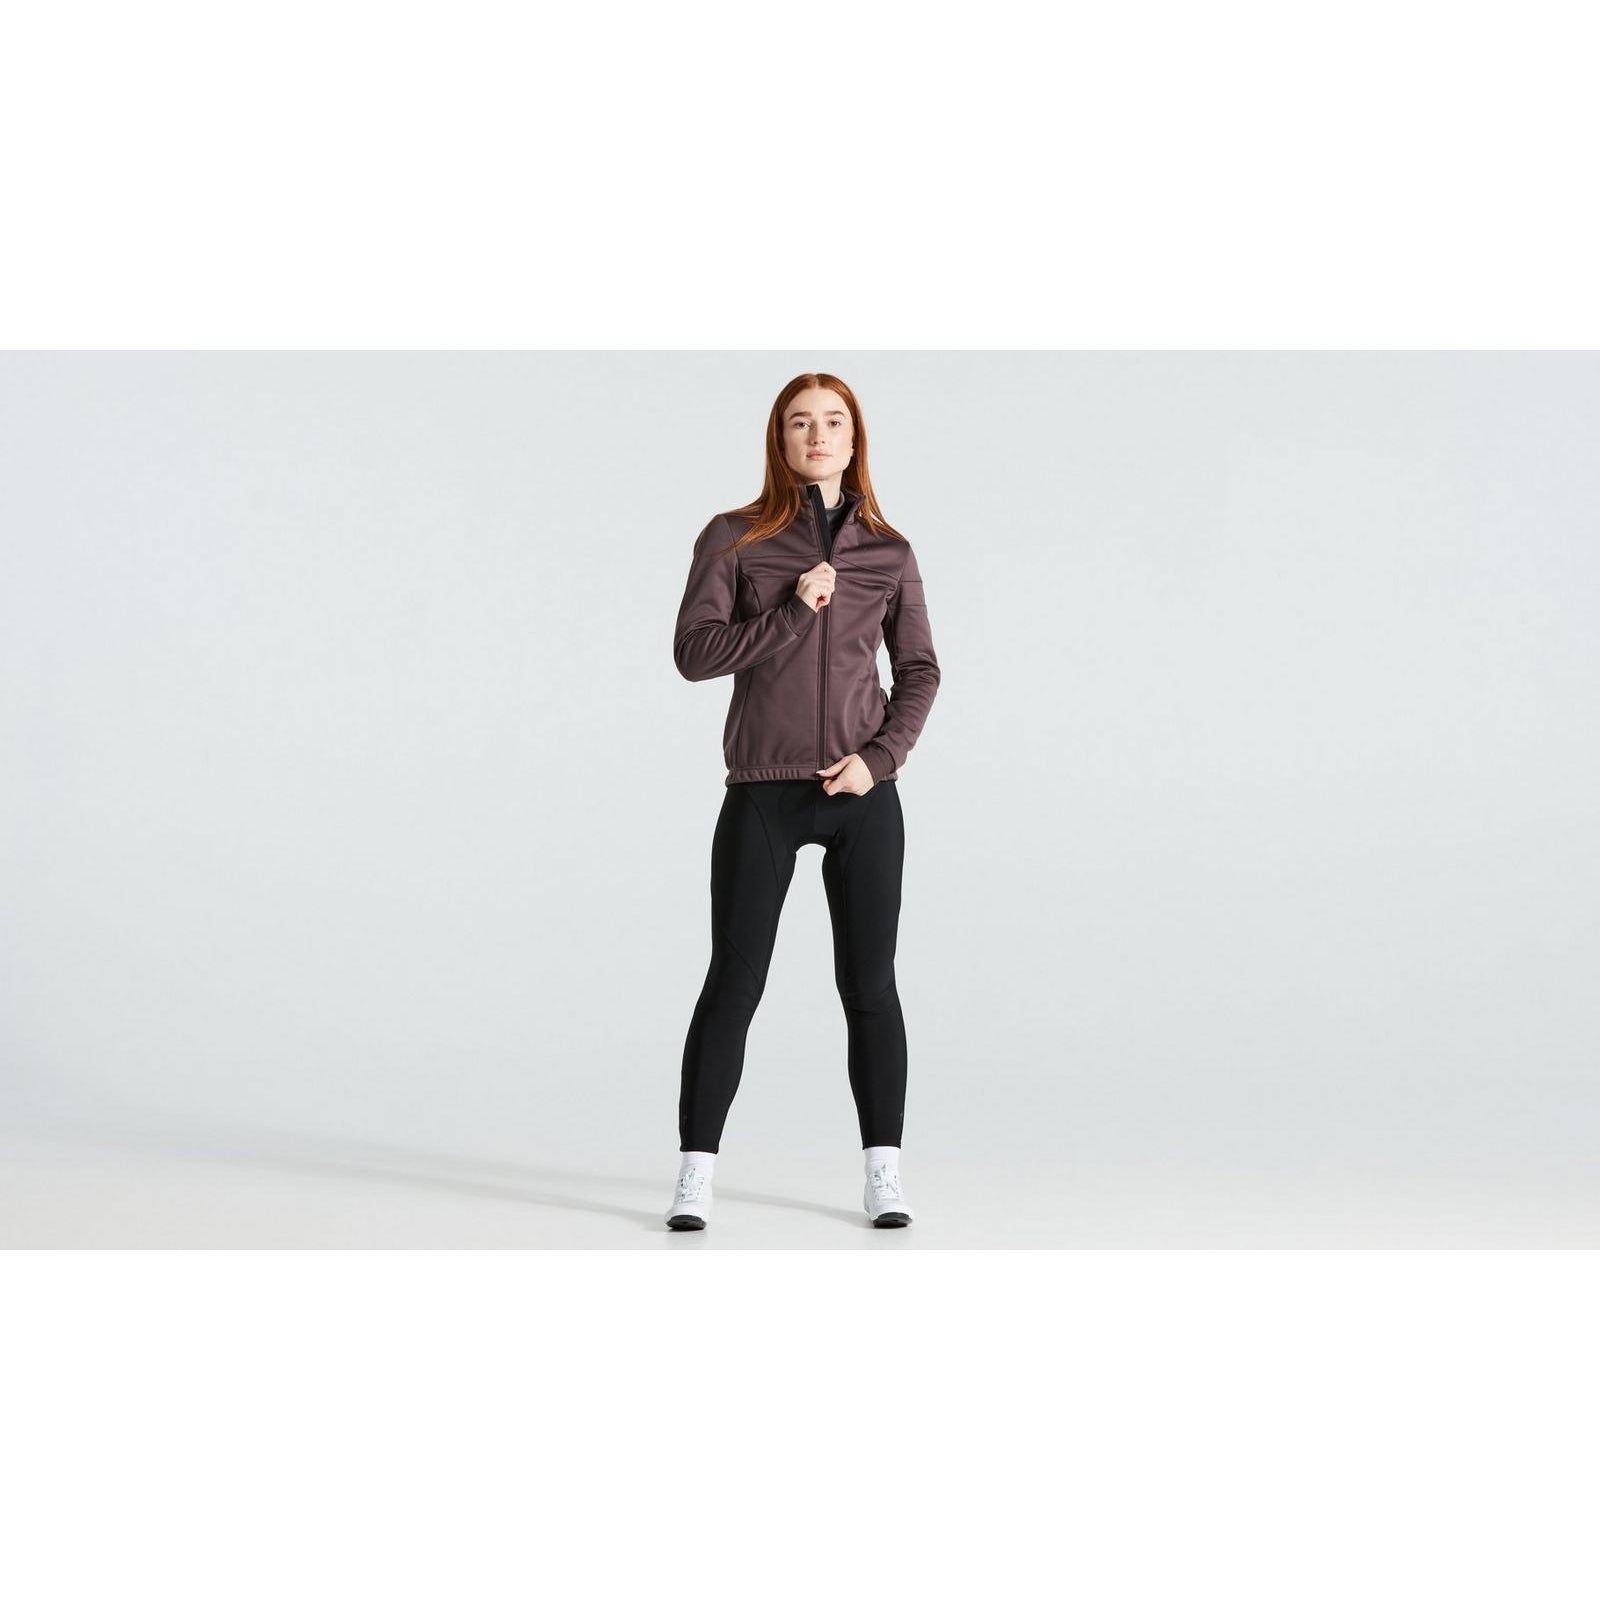 Specialized Women's RBX Softshell Jacket - Jackets - Bicycle Warehouse